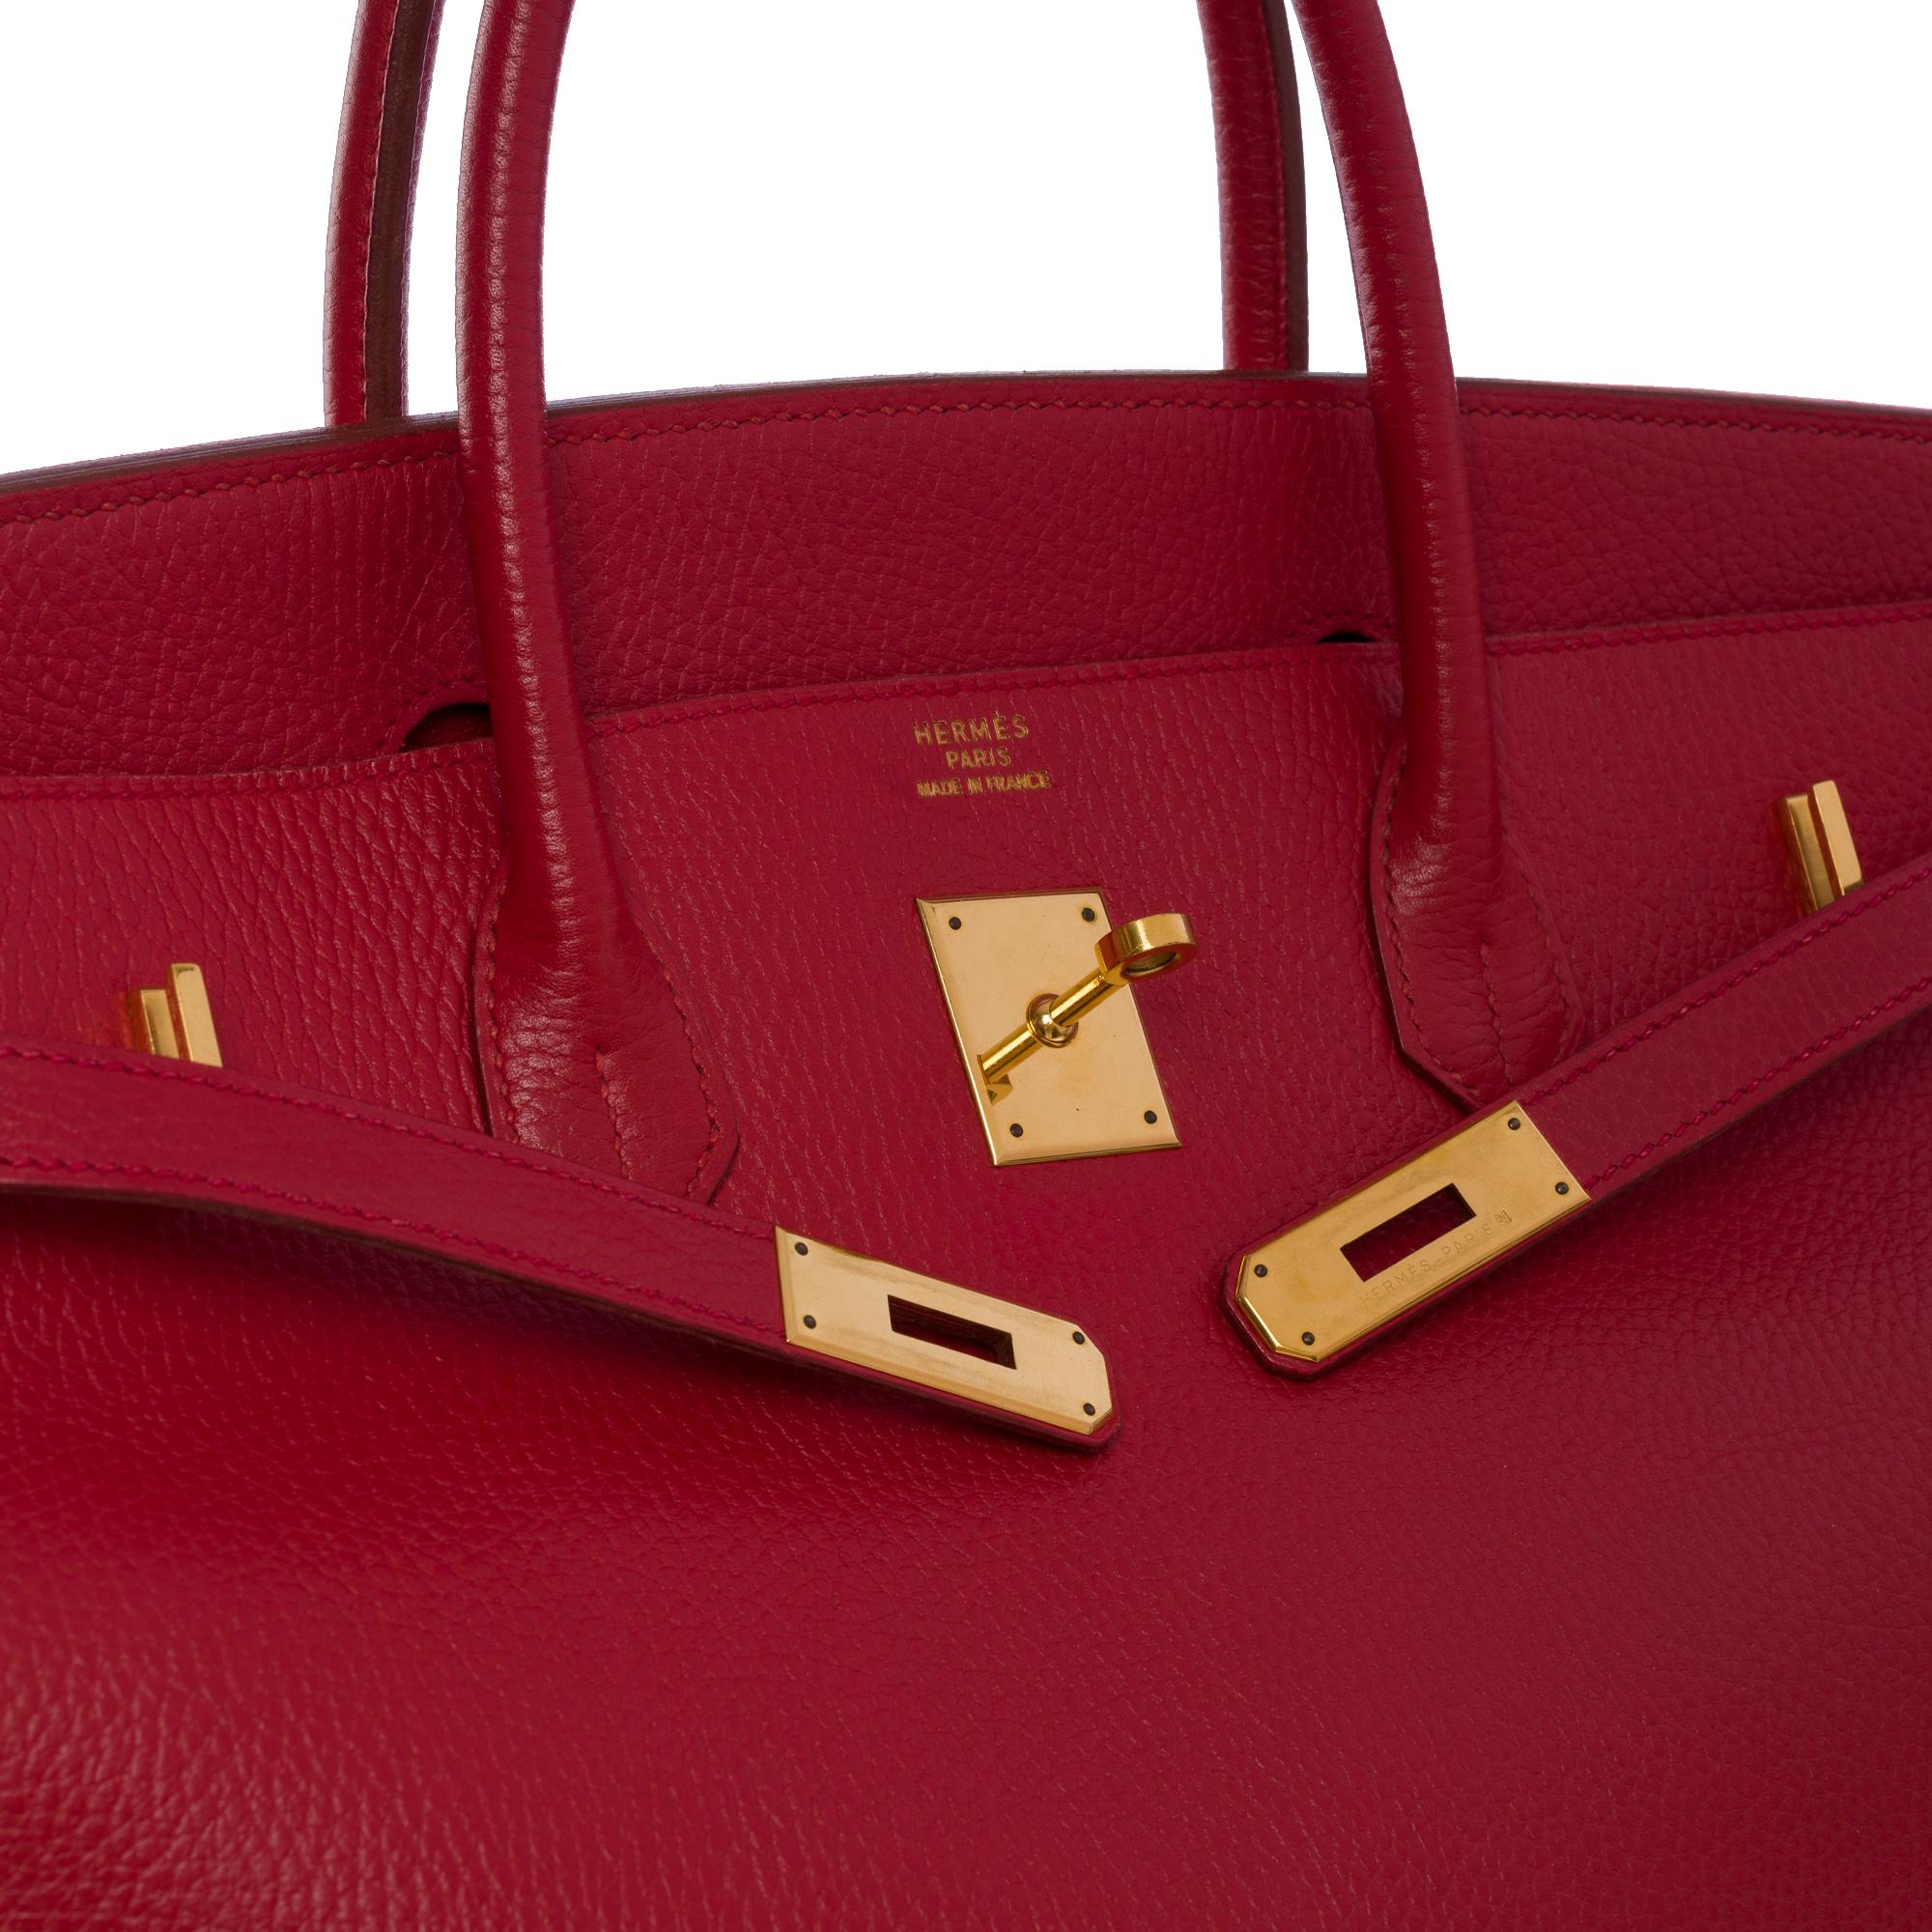 Rare & Collector Hermes Birkin 40cm handbag in Red Vache Ardennes leather, GHW For Sale 2